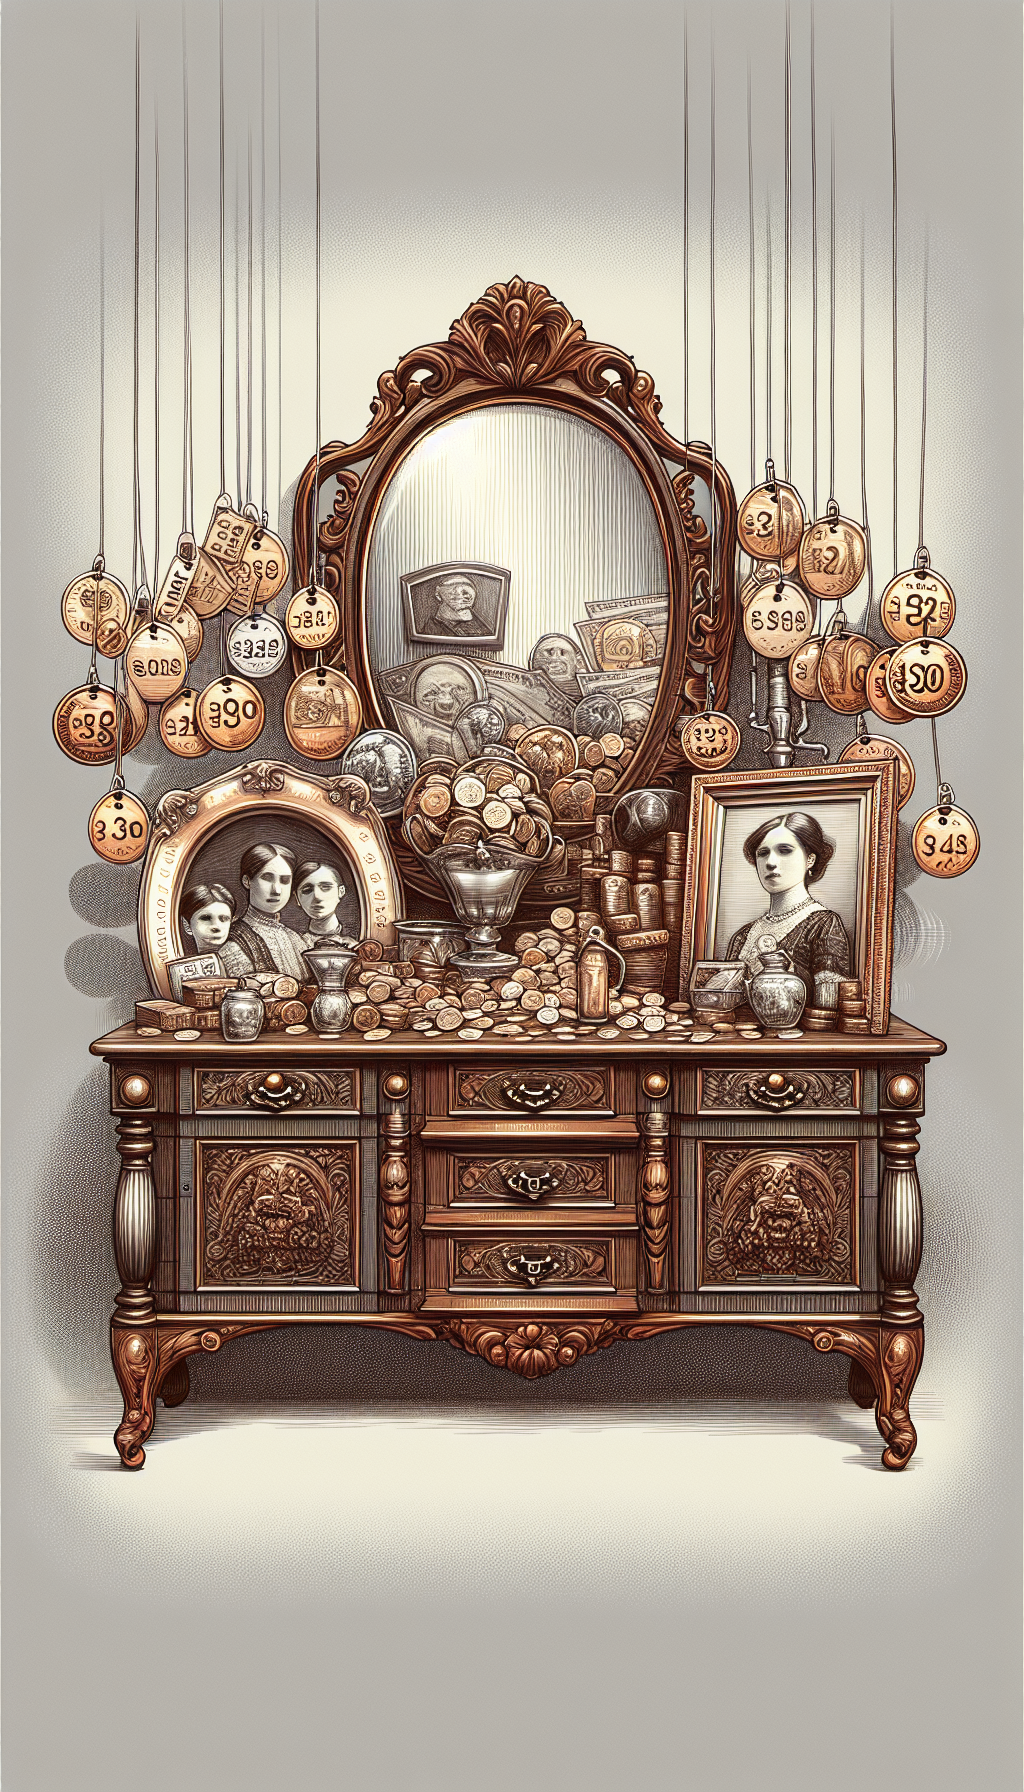 An elegant sideboard with intricate wood detailing and a vintage mirror reflects shimmering coins and paper money, all adorning its polished surface. Amidst family portraits and heirloom trinkets, price tags dangle with notable figures, subtly highlighting the lucrative potential. The classic and digital strokes merge, with the antique in fine lines and valuations in pixelated digits, capturing the fusion of past wealth and modern commerce.